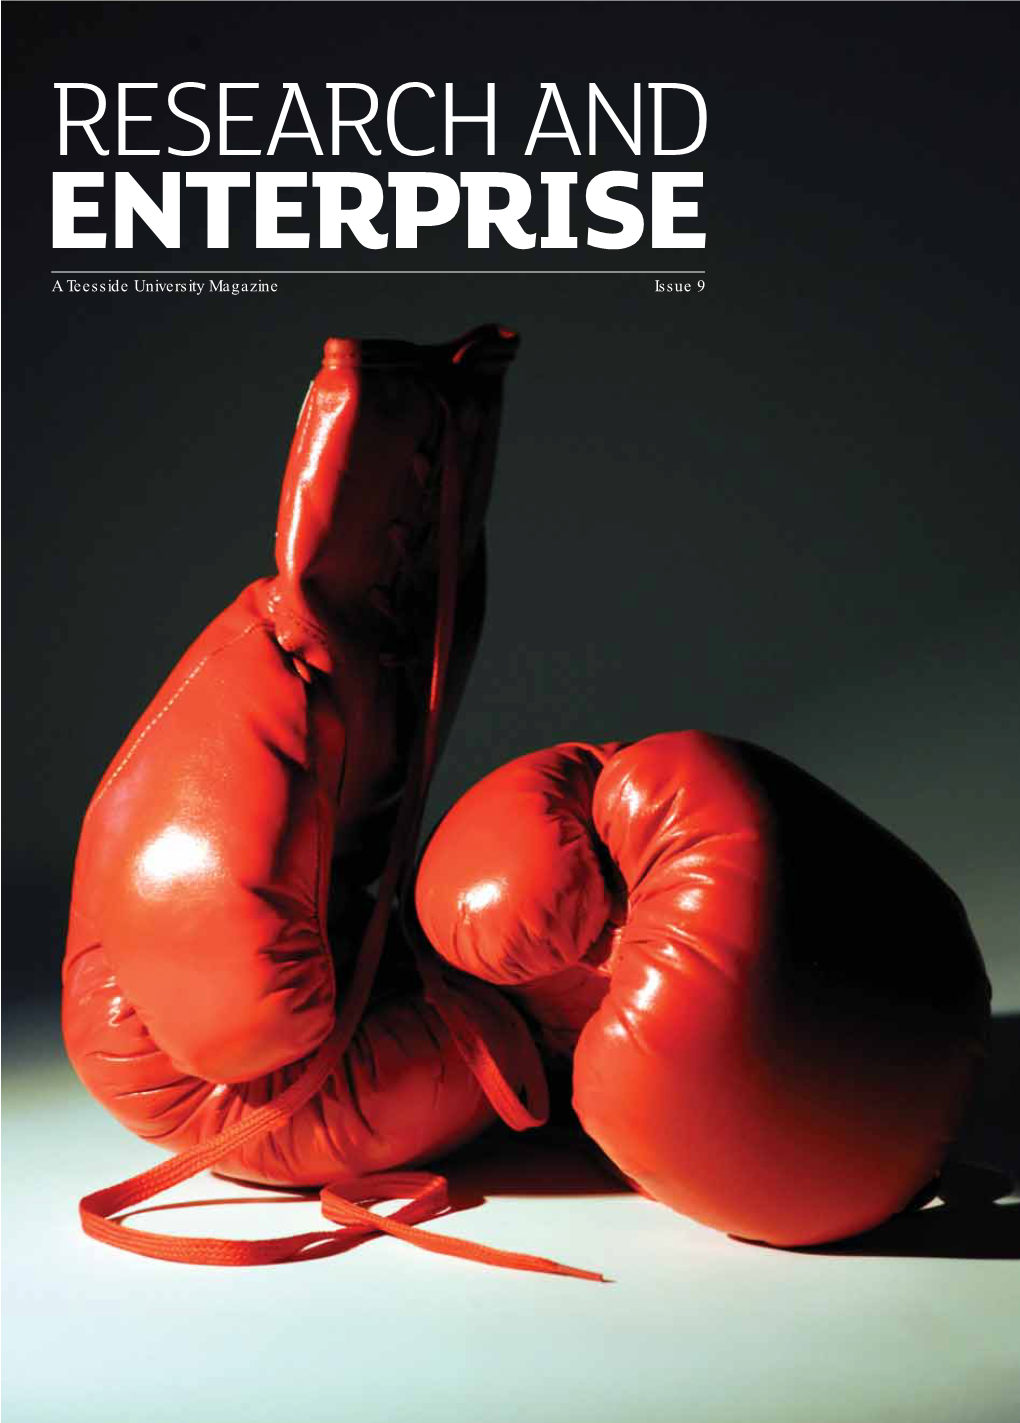 A Teesside University Magazine Issue 9 Research and Enterprise 2